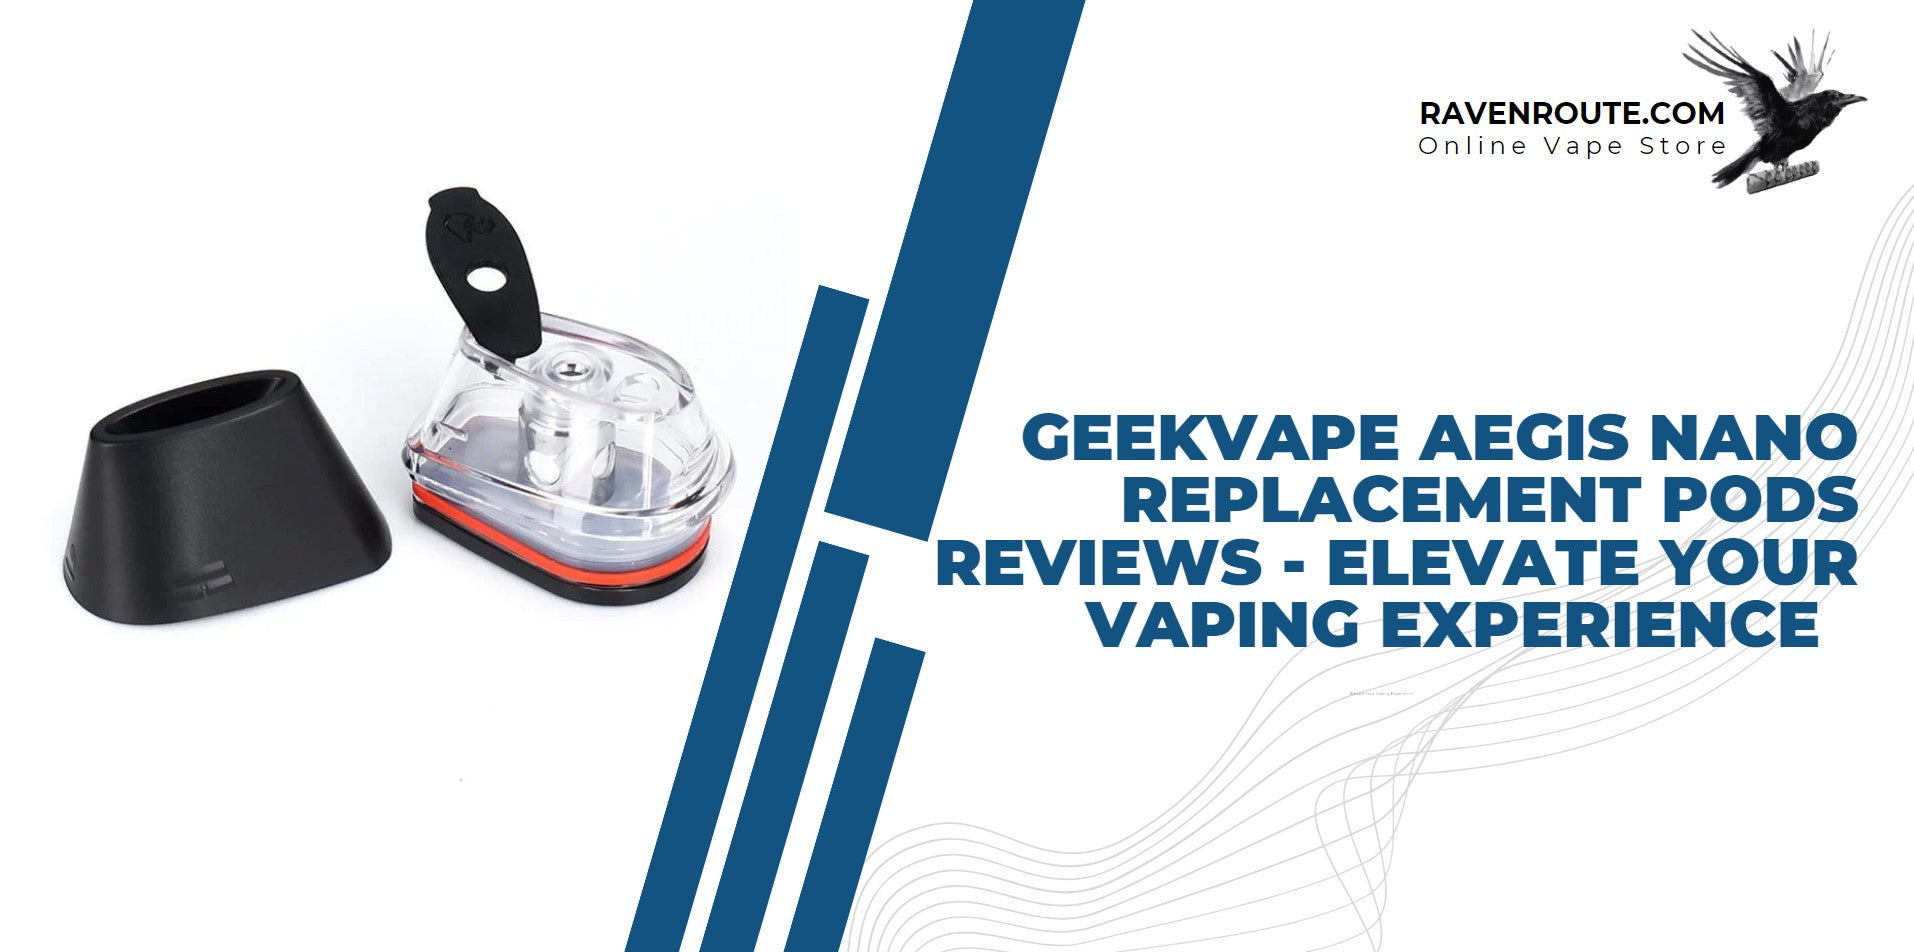 GeekVape Aegis Nano Replacement Pods Reviews - Elevate Your Vaping Experience